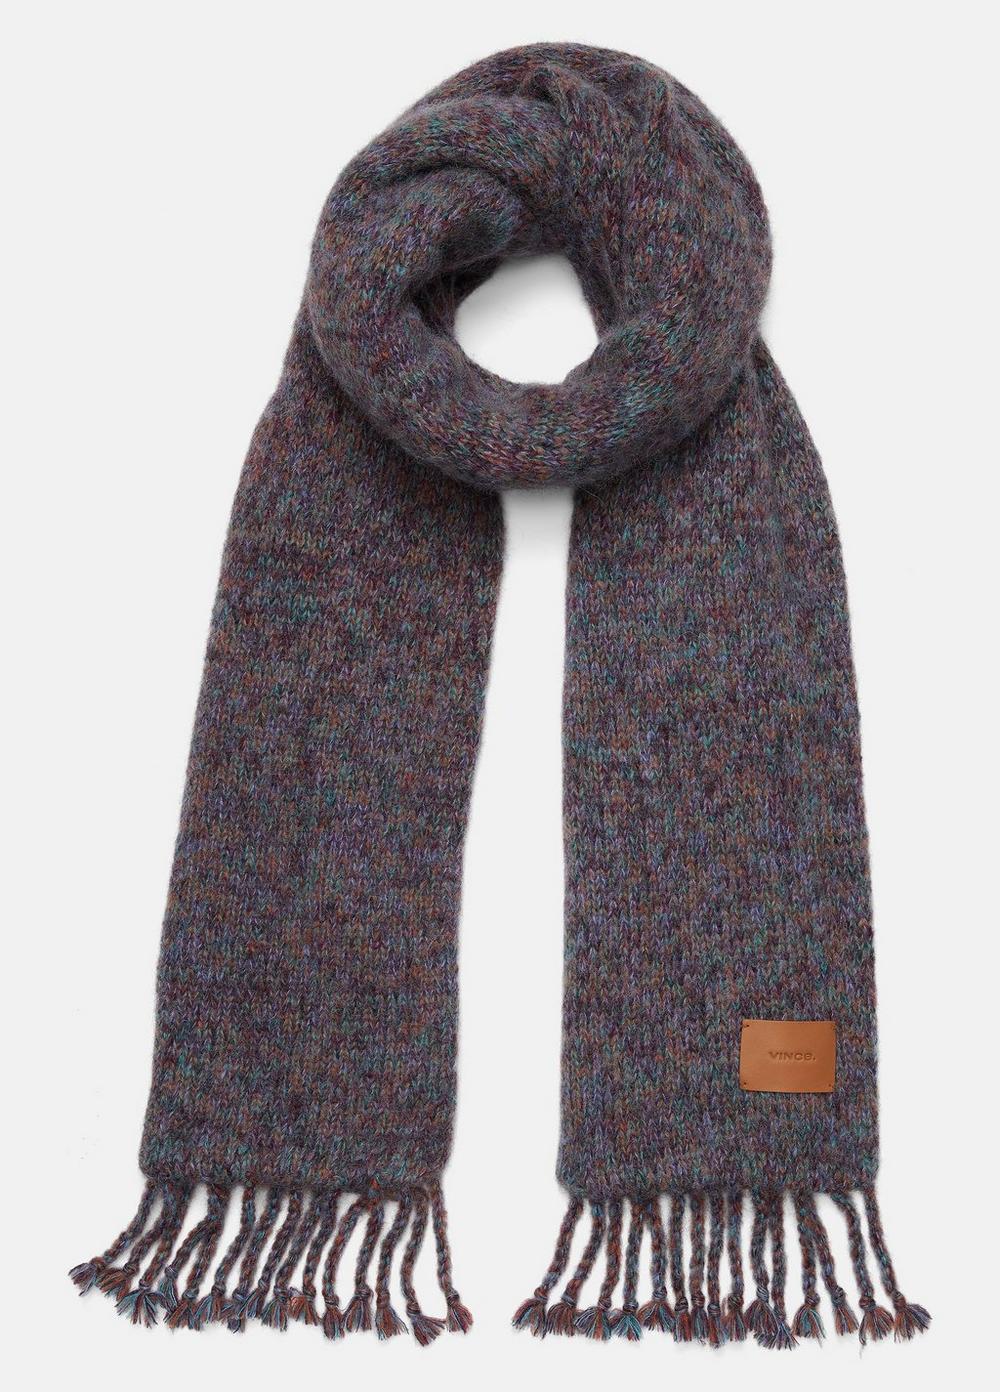 Alpaca-Blend Marled-Knit Scarf, Rust/teal Stone Combo Vince